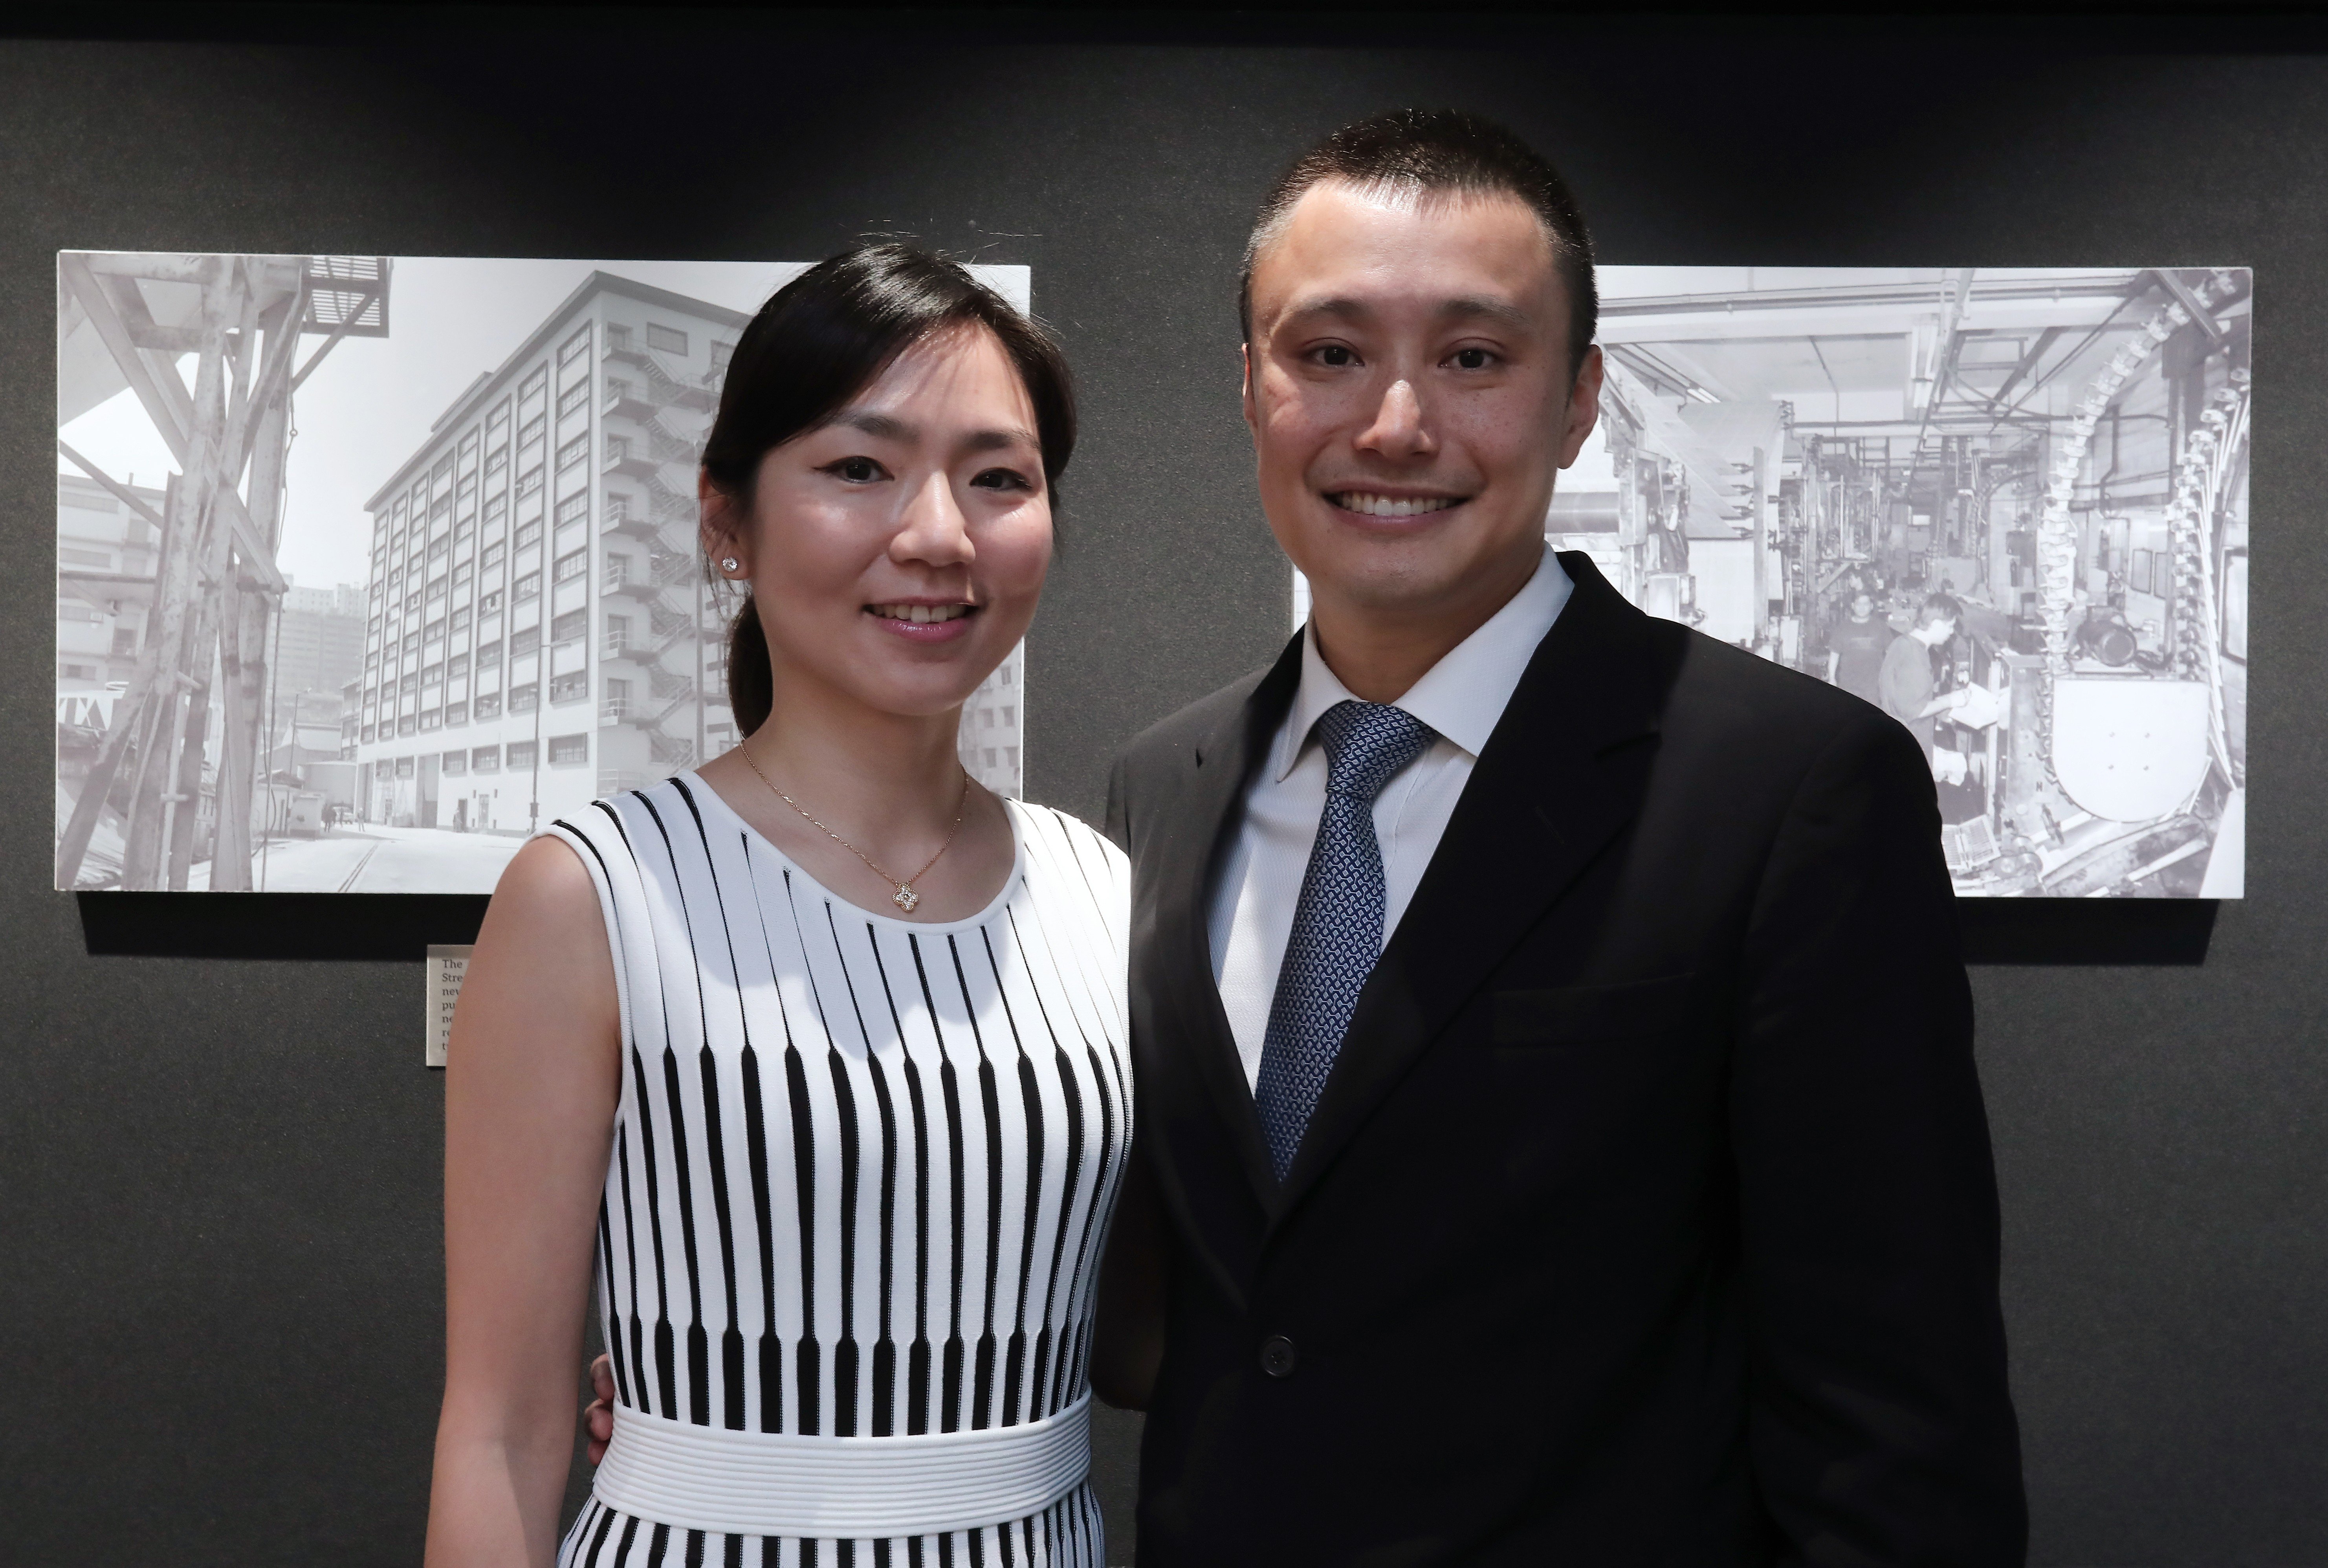 WeLab was founded by Frances Kang (left) and Simon Loong, who is also the chief executive of the company. The two were married after completing mid-career studies in the US in 2012. Photo: Jonathan Wong